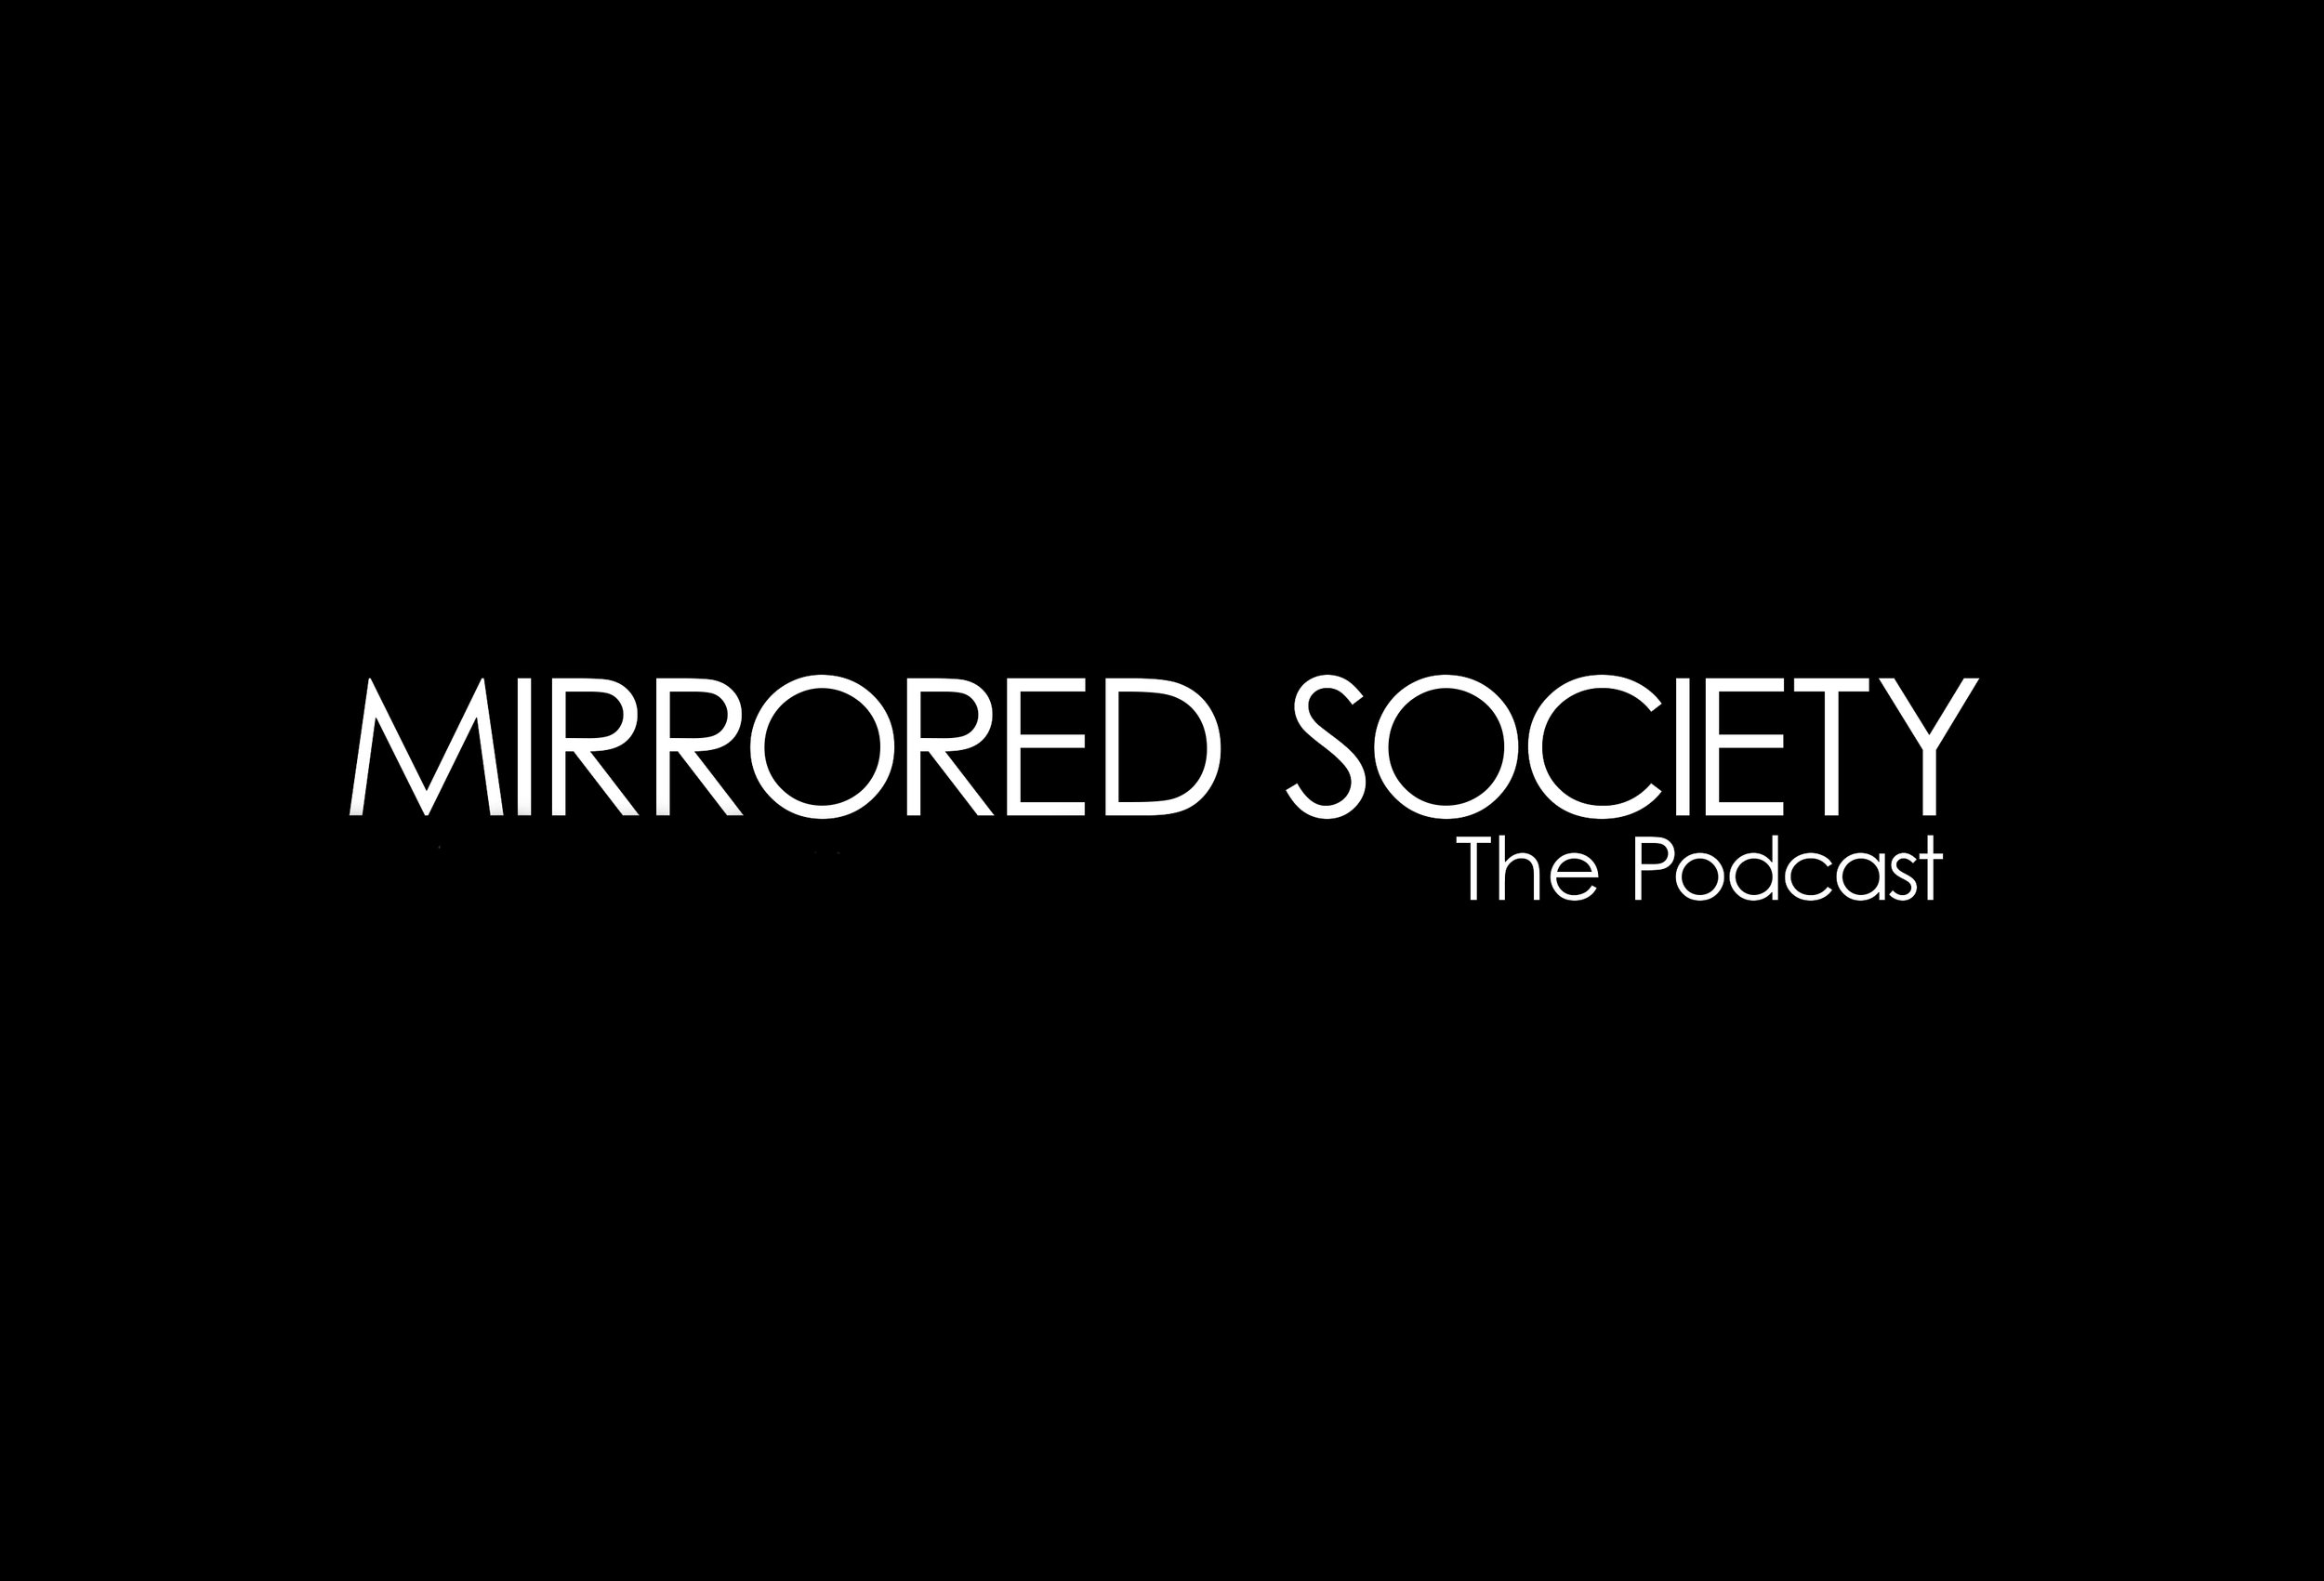 Mirrored Society - The Podcast